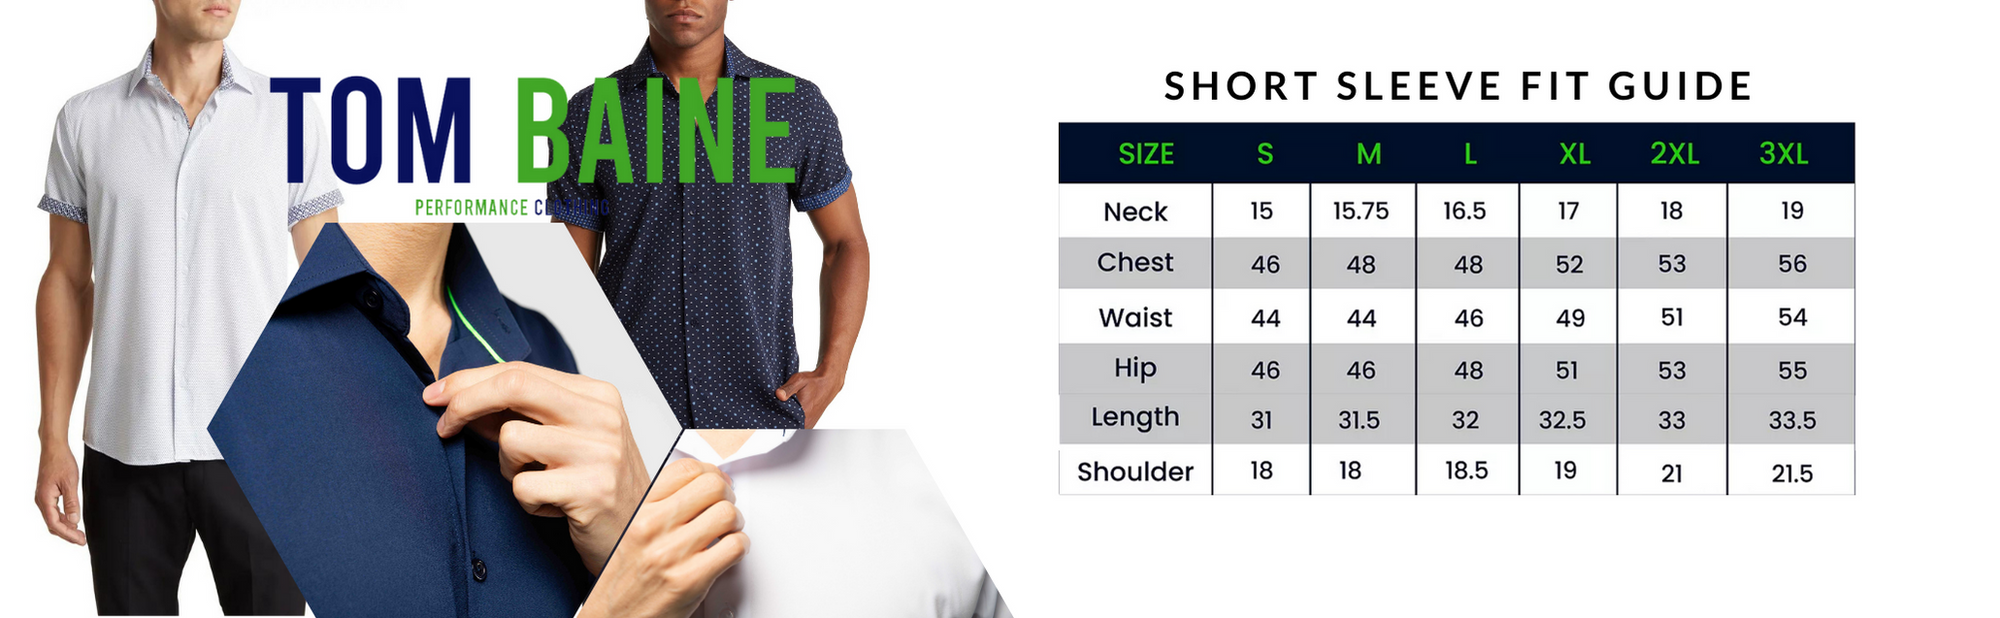 Short Sleeve Size Guide